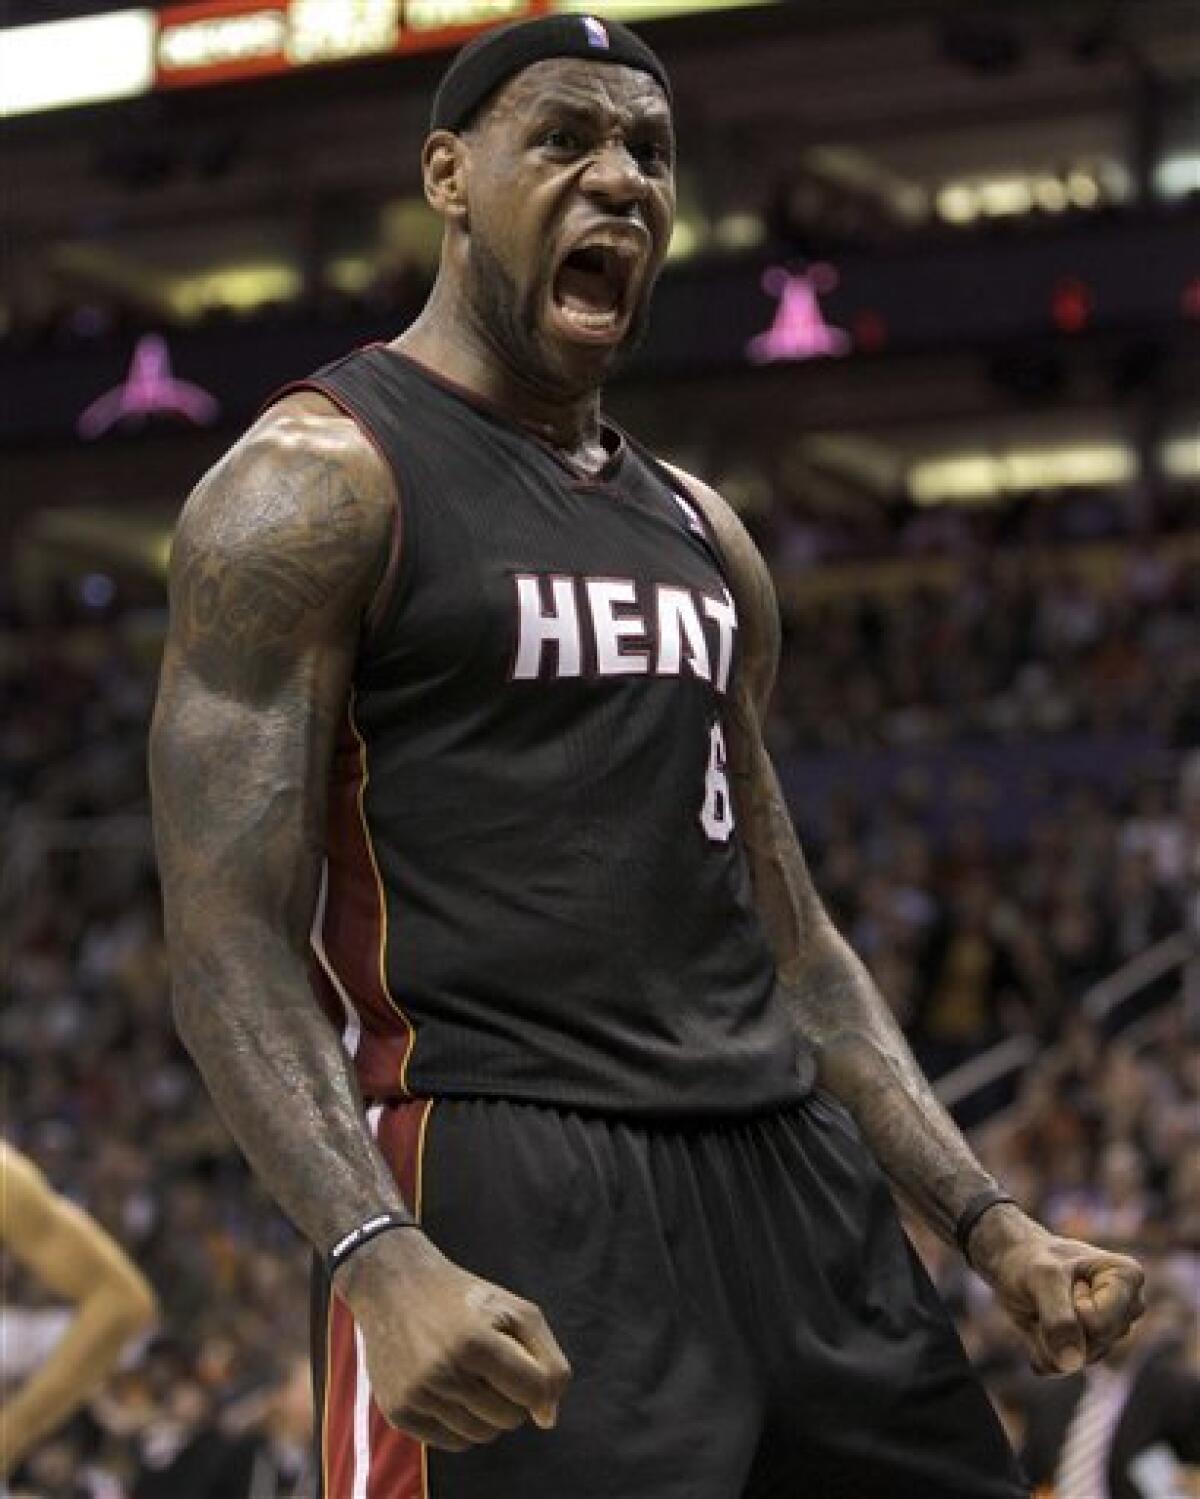 LeBron could use an assist from Miami Heat teammates, Matt Youmans, Sports